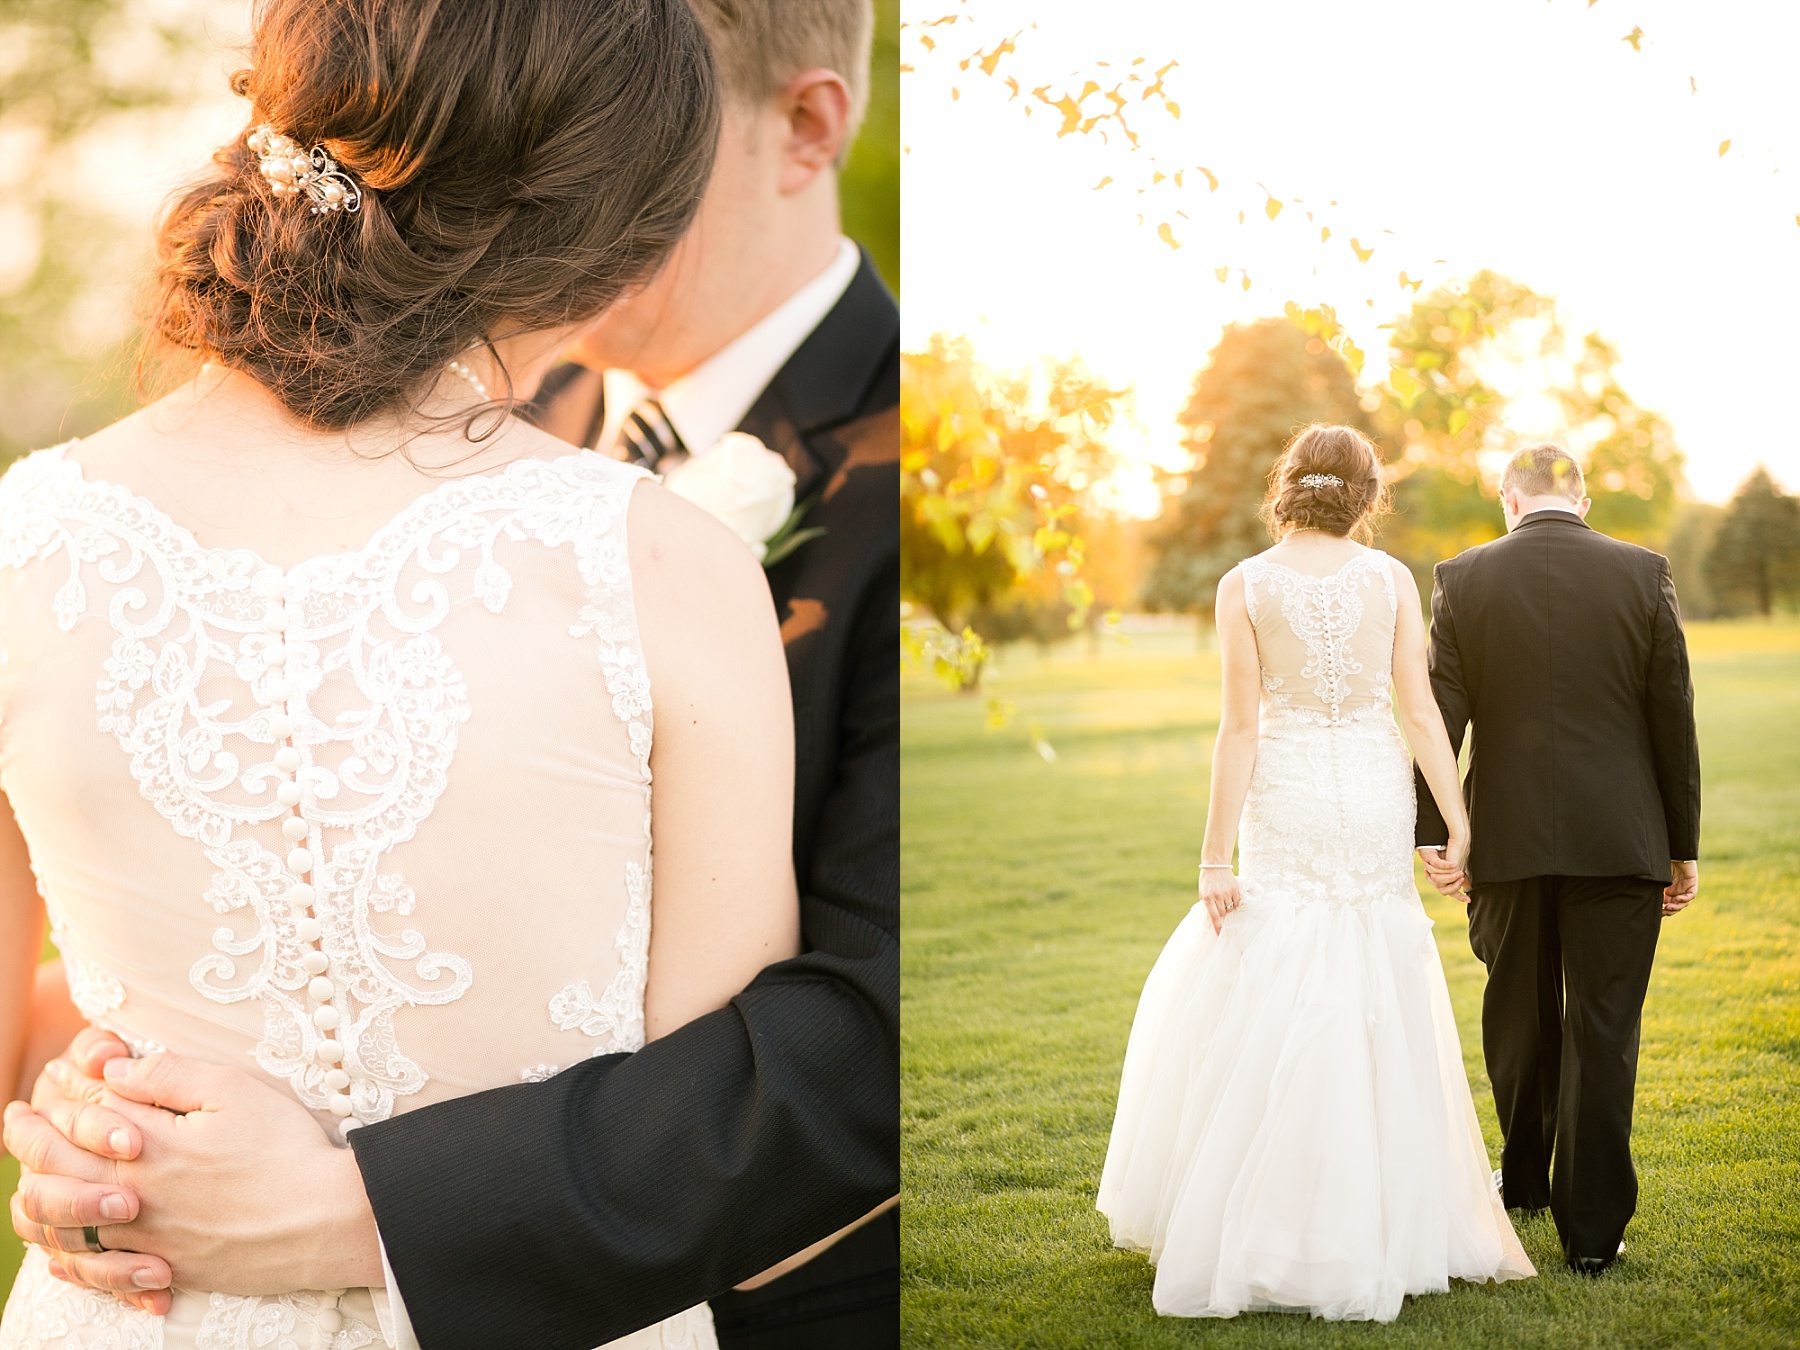 You can just see the love and joy Emily & Ross share for each other.  Their wedding at Hickory Hills Golf Course in Eau Claire was one for the books!